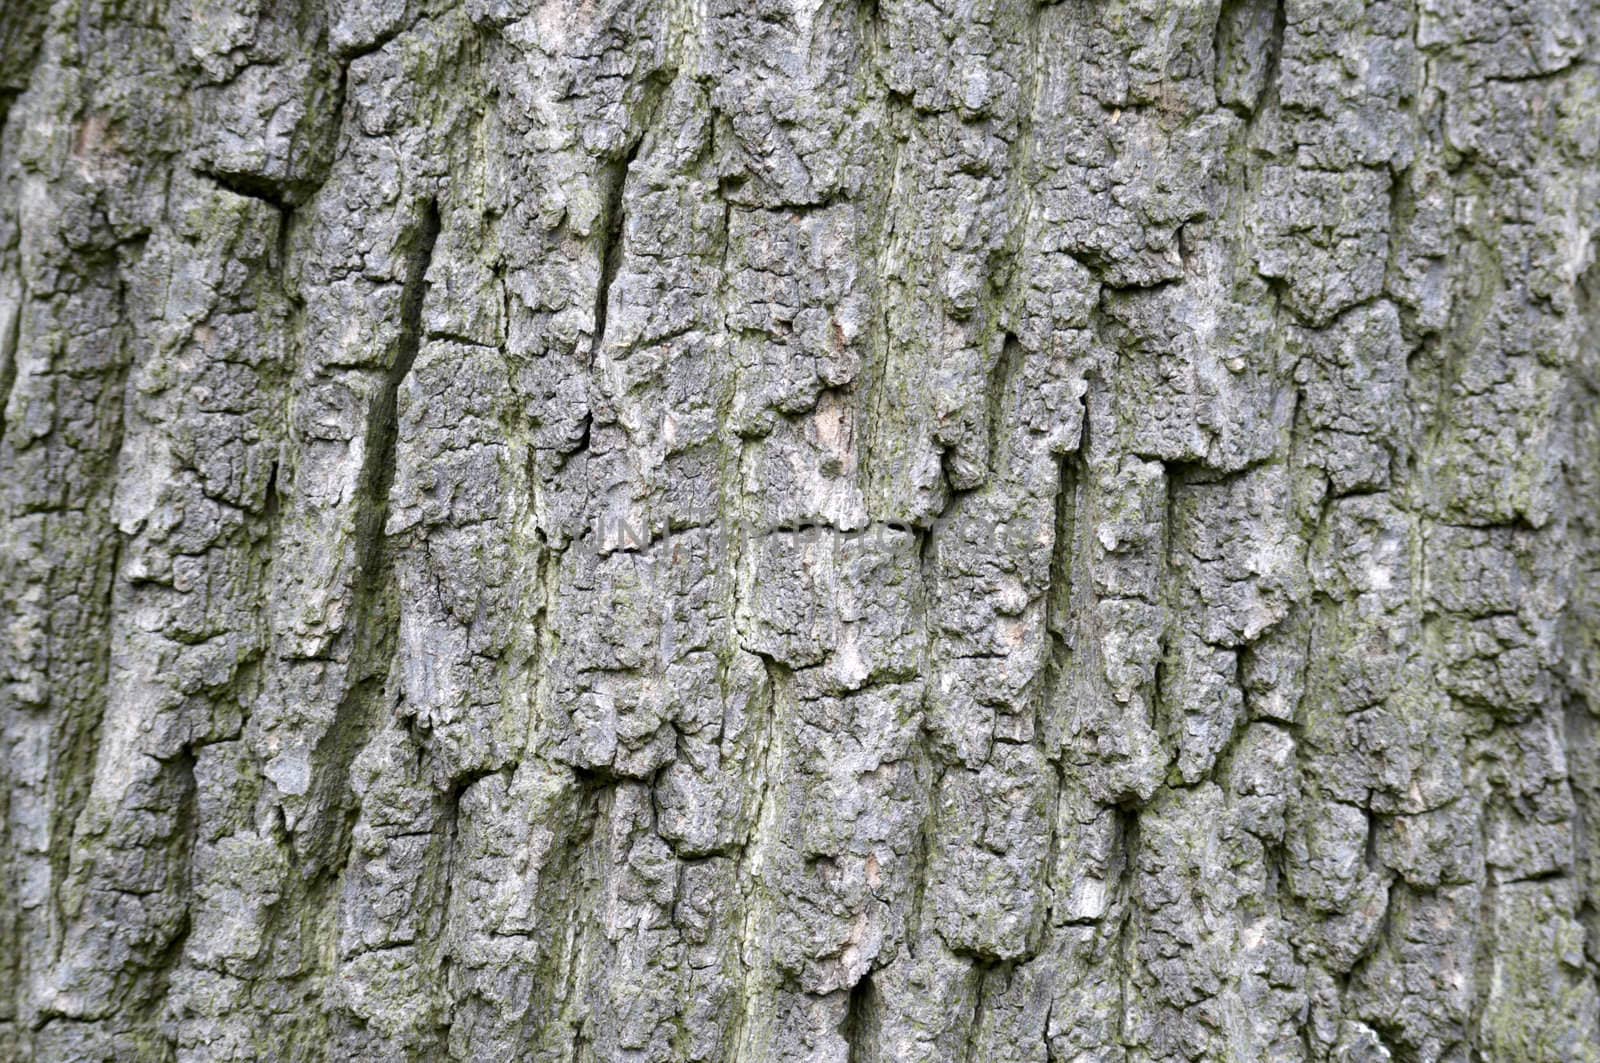 Close up detail of the texture on a tree trunk